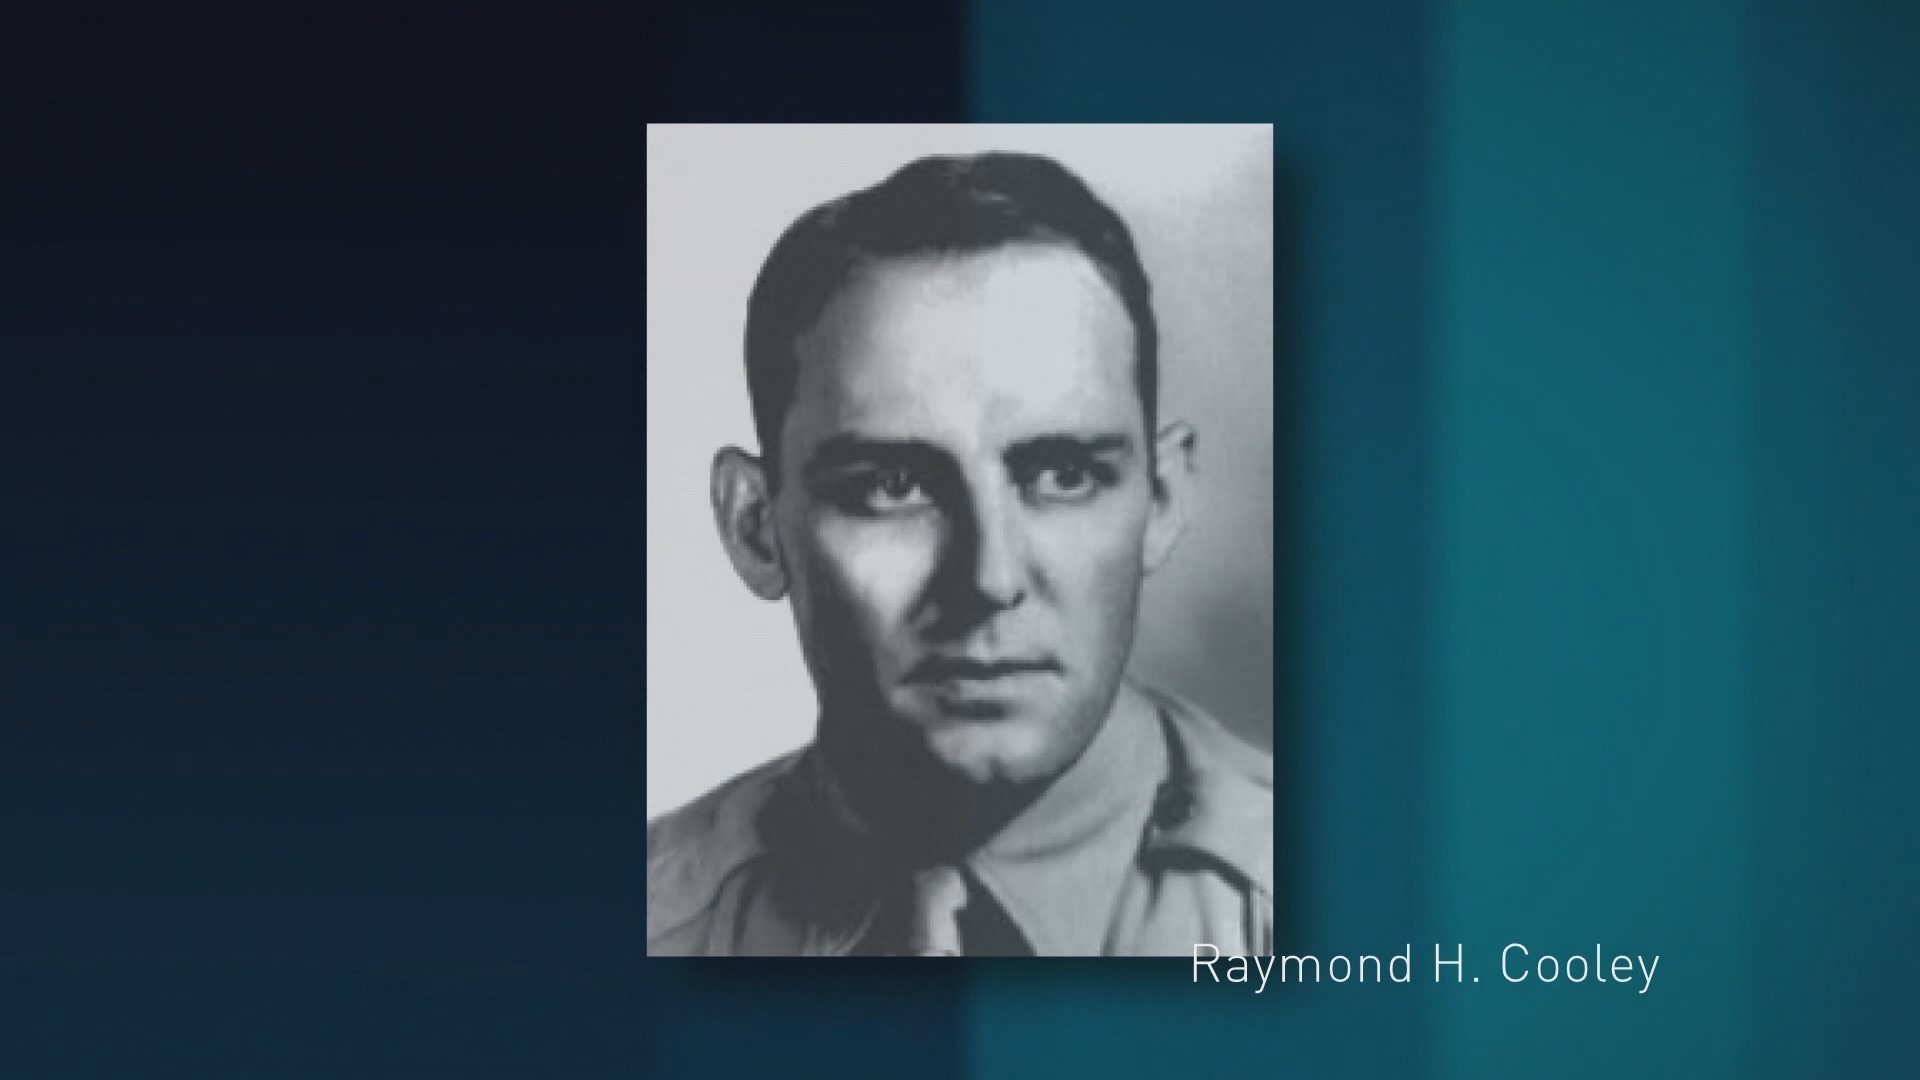 Out of the millions who have served in the U.S. Armed Forces, only 3,507 have received the Medal of Honor. Raymond Cooley is one of 14 recipients from East TN.